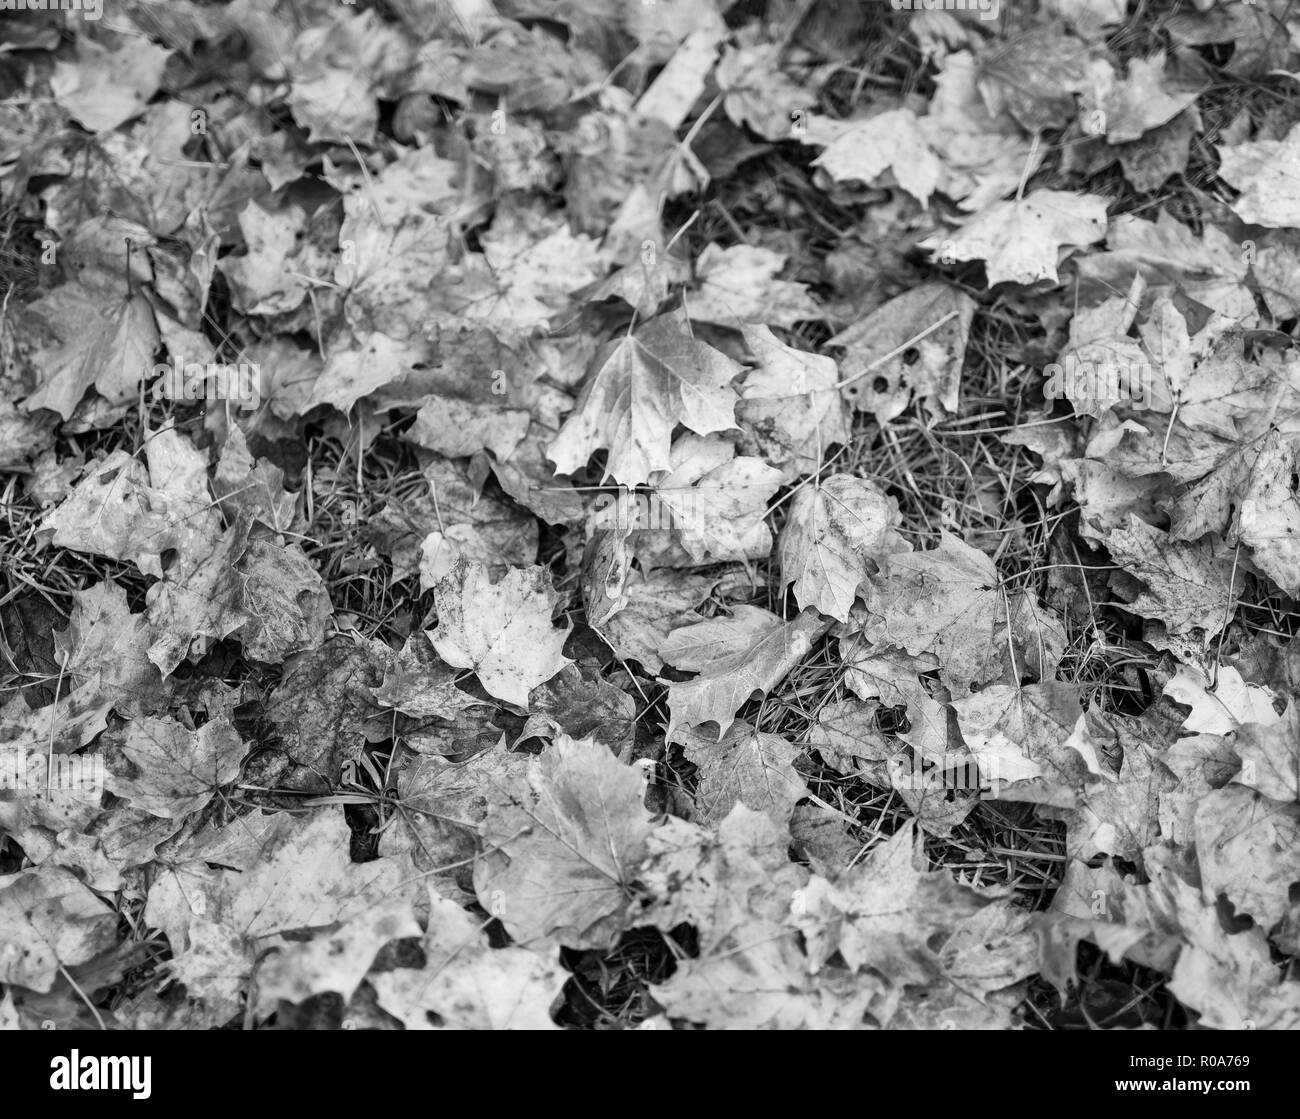 Pile of leaves jump Black and White Stock Photos & Images - Alamy